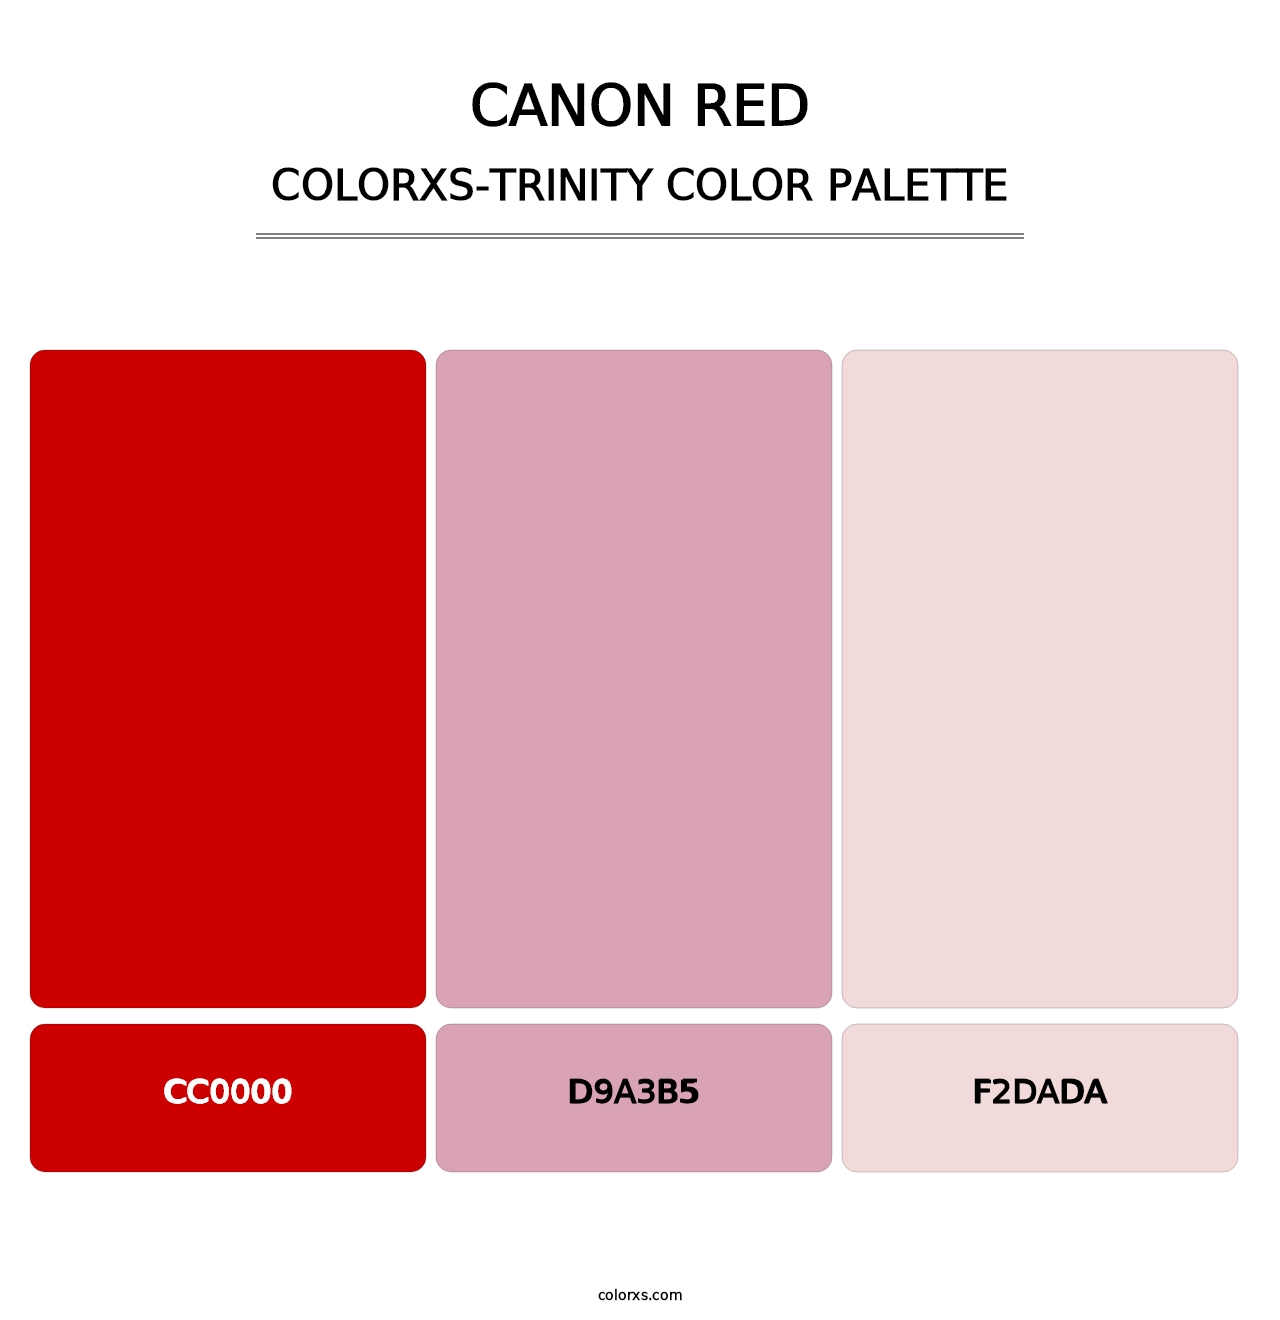 Canon Red - Colorxs Trinity Palette